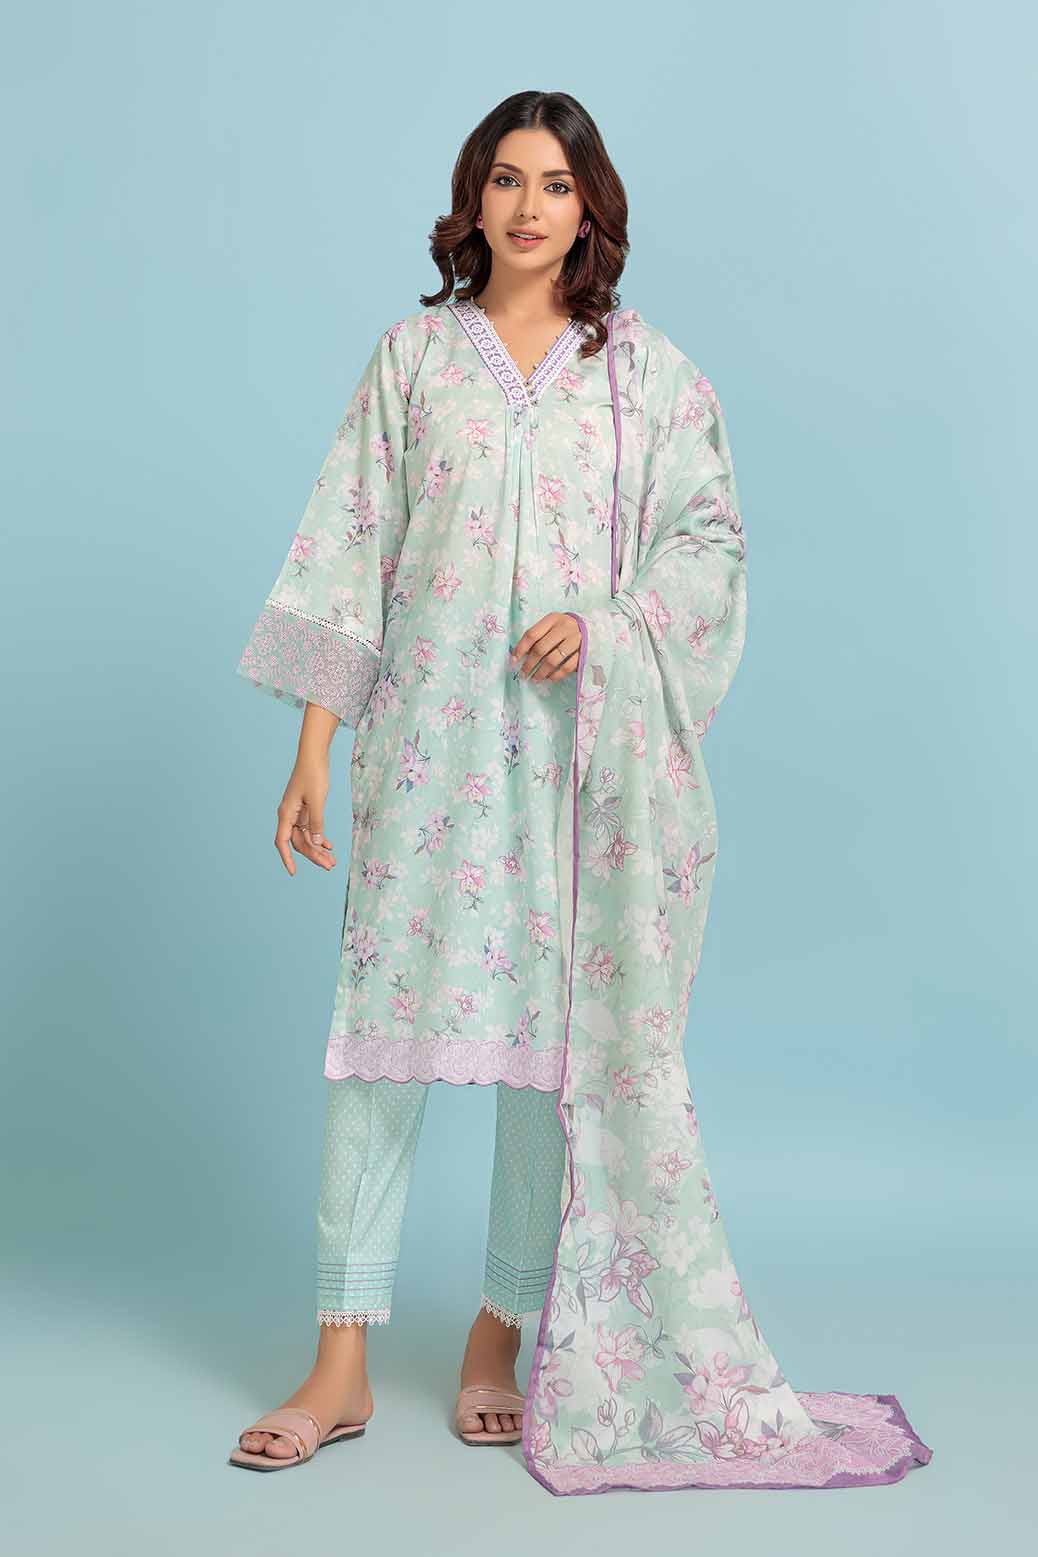 MORNING GLORY 3 PC Suit 